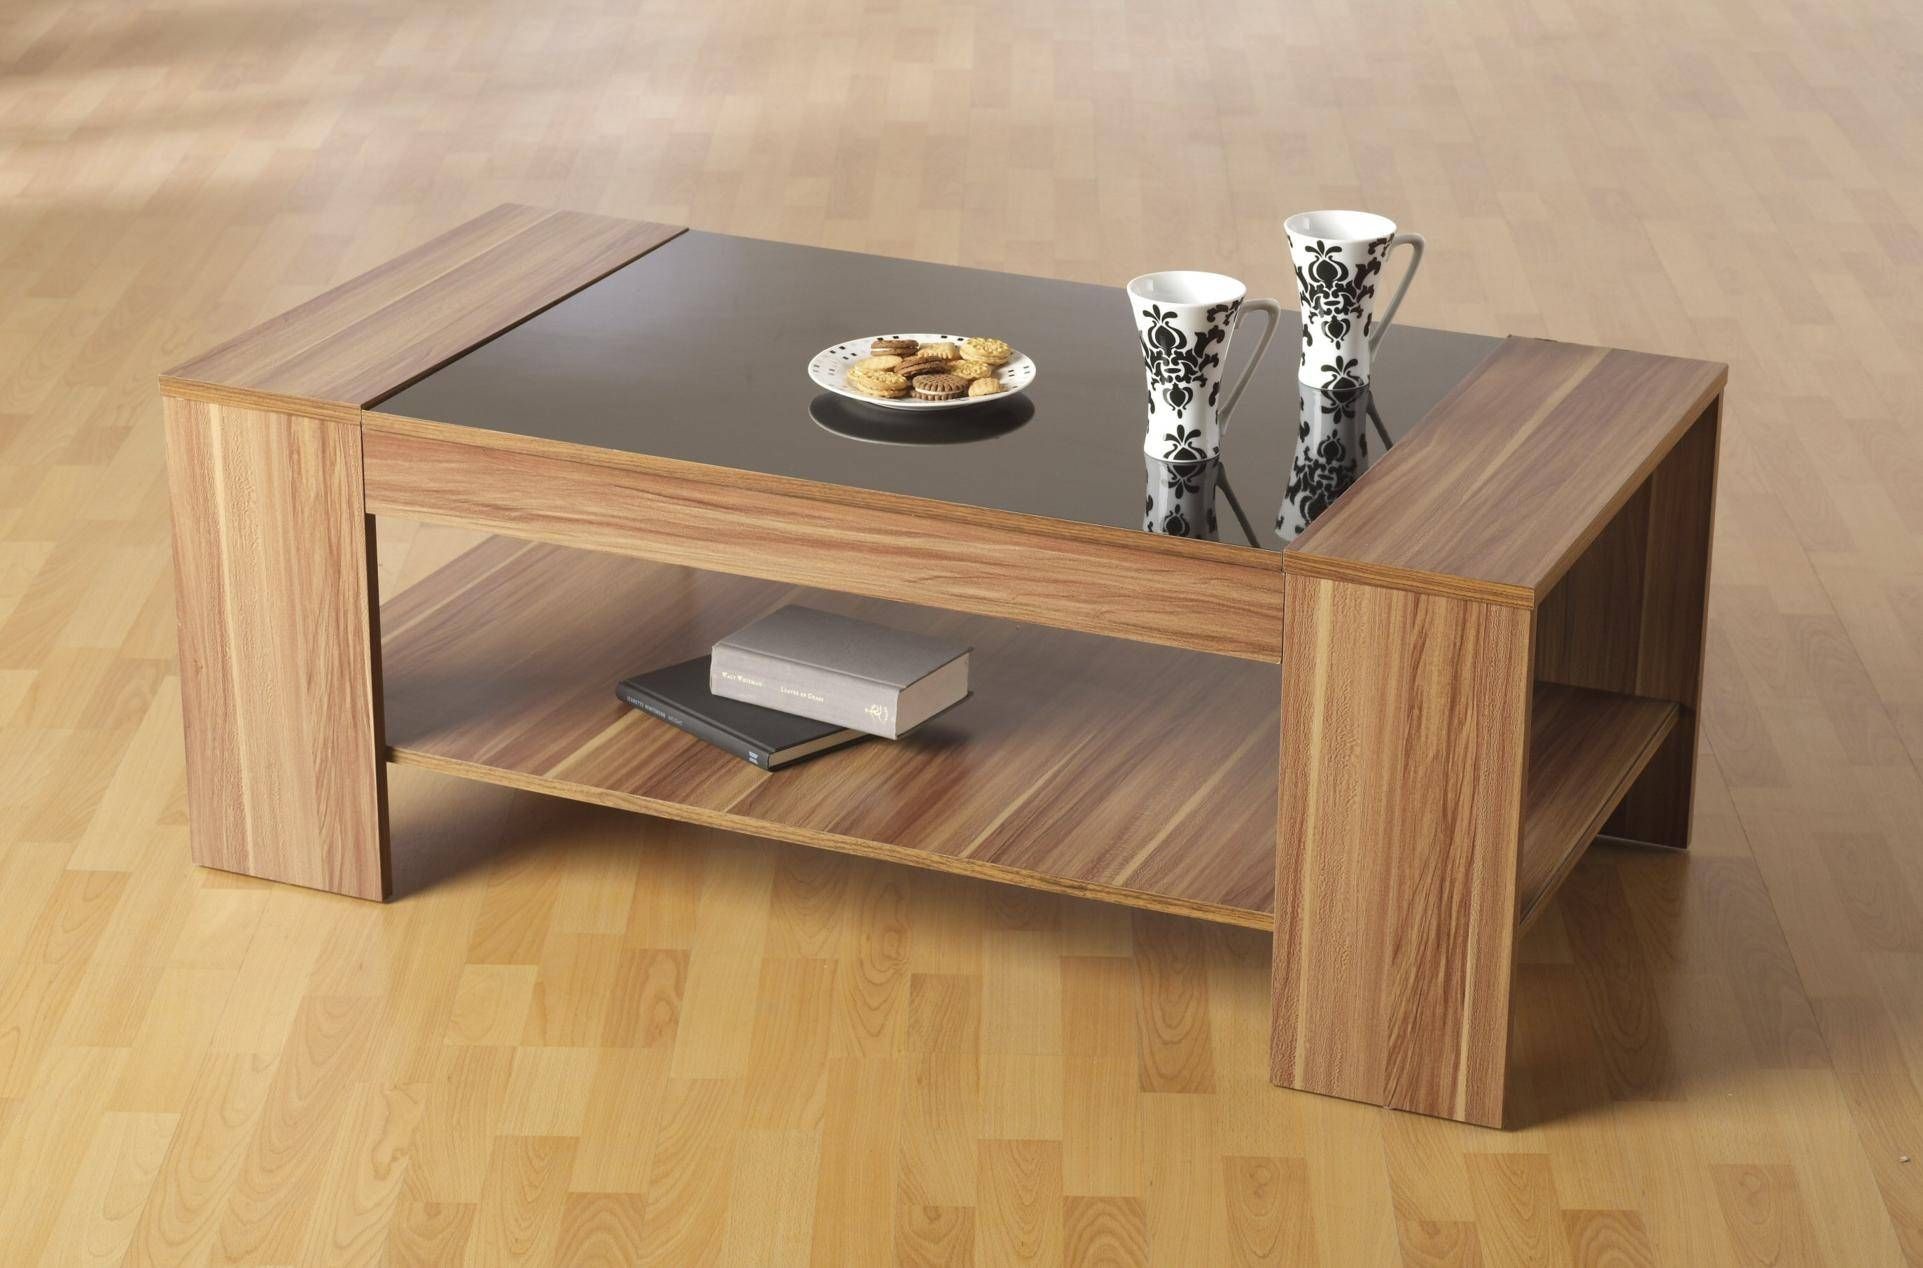 Wood Coffee Table Designs 10 Gorgeous Inspiration Wooden Coffee Regarding Wooden Coffee Tables With Storage (View 26 of 30)